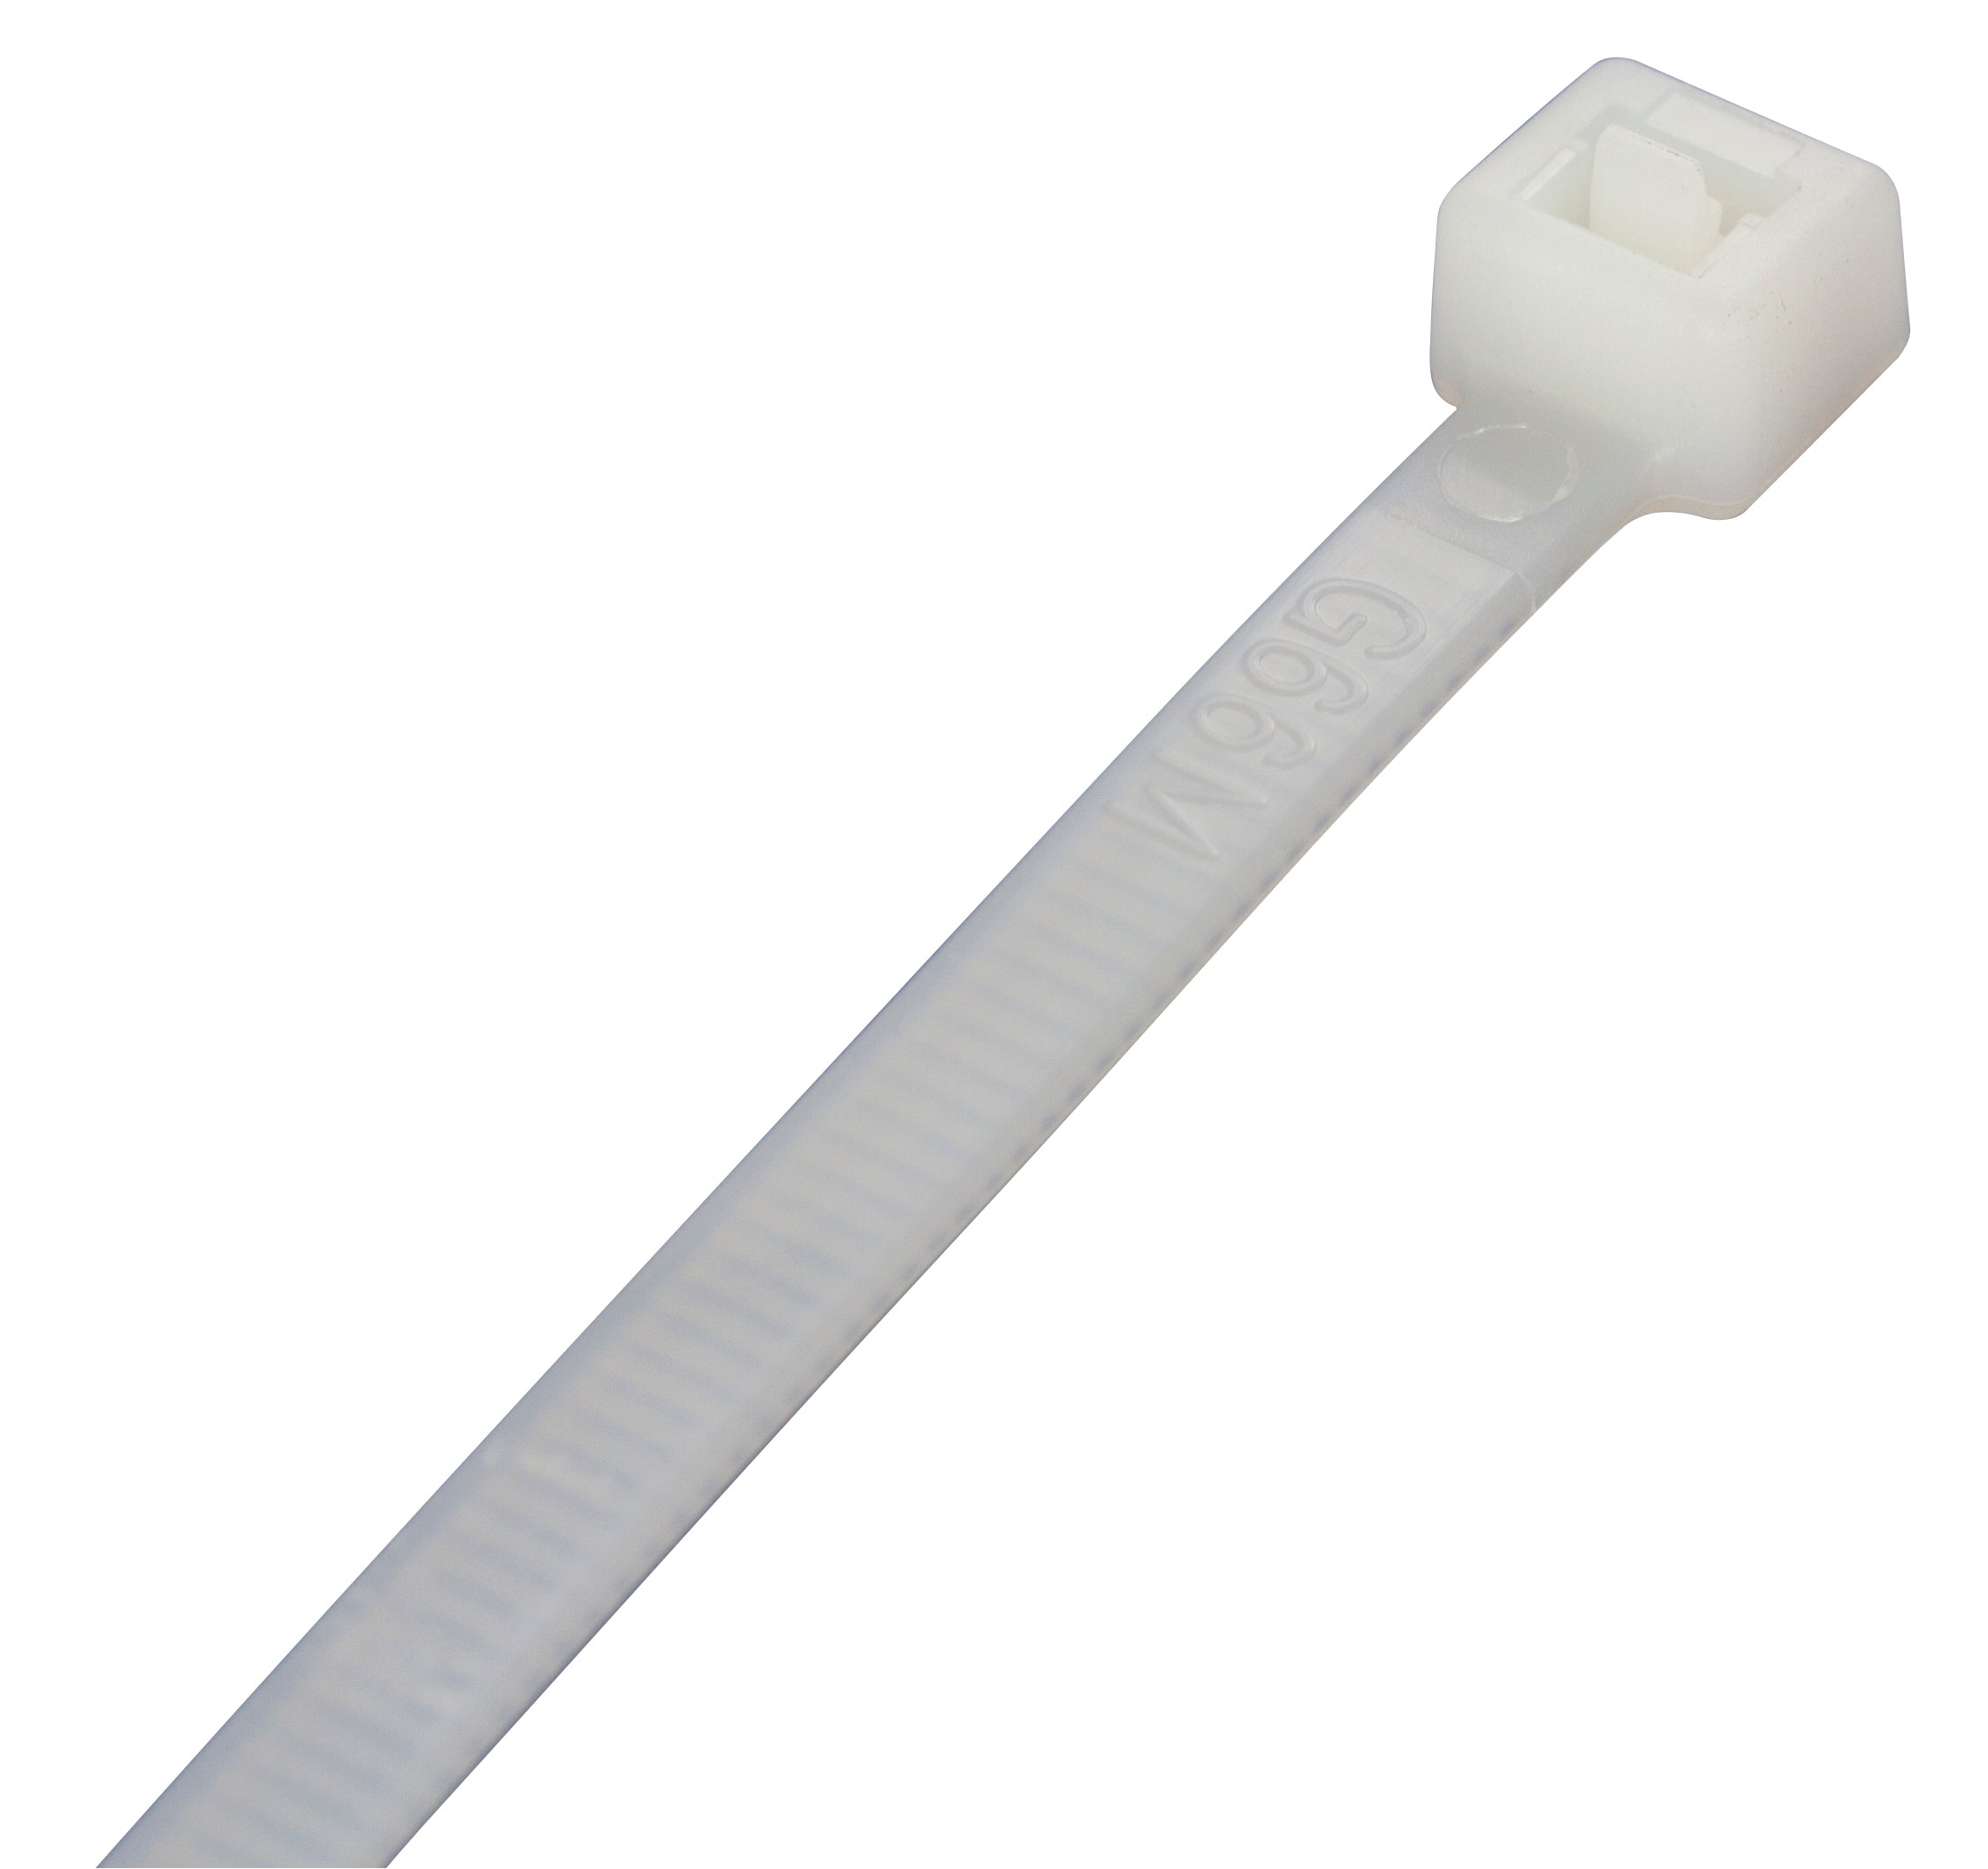 Premium Natural Cable Ties 1020mm x 9.0mm - Pack of 100